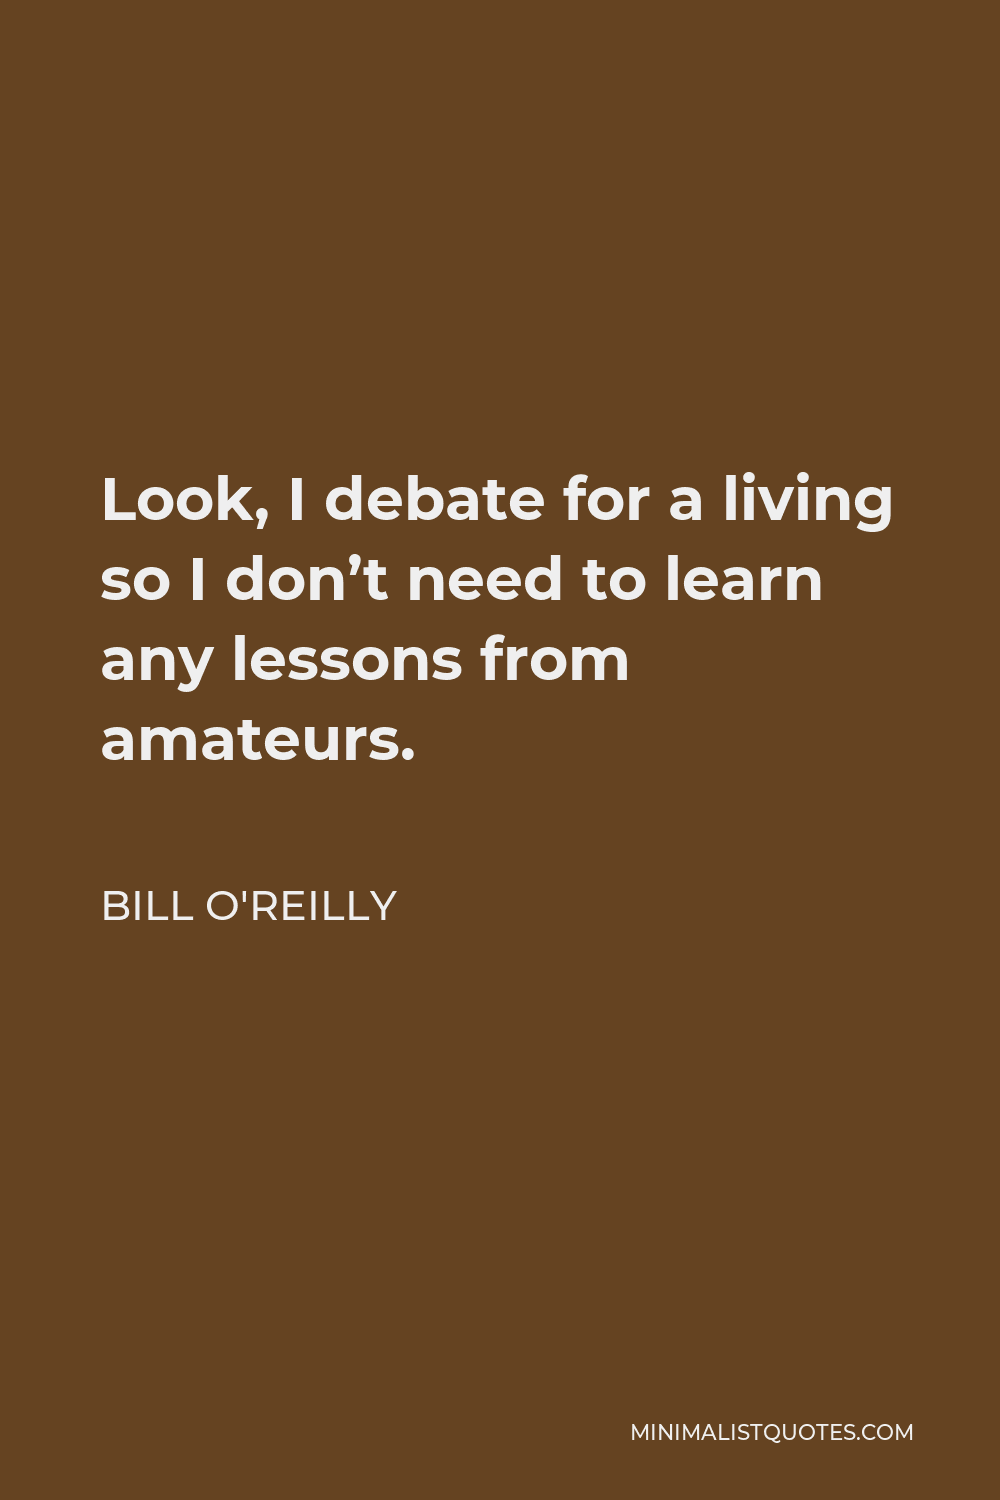 Bill O'Reilly Quote - Look, I debate for a living so I don’t need to learn any lessons from amateurs.